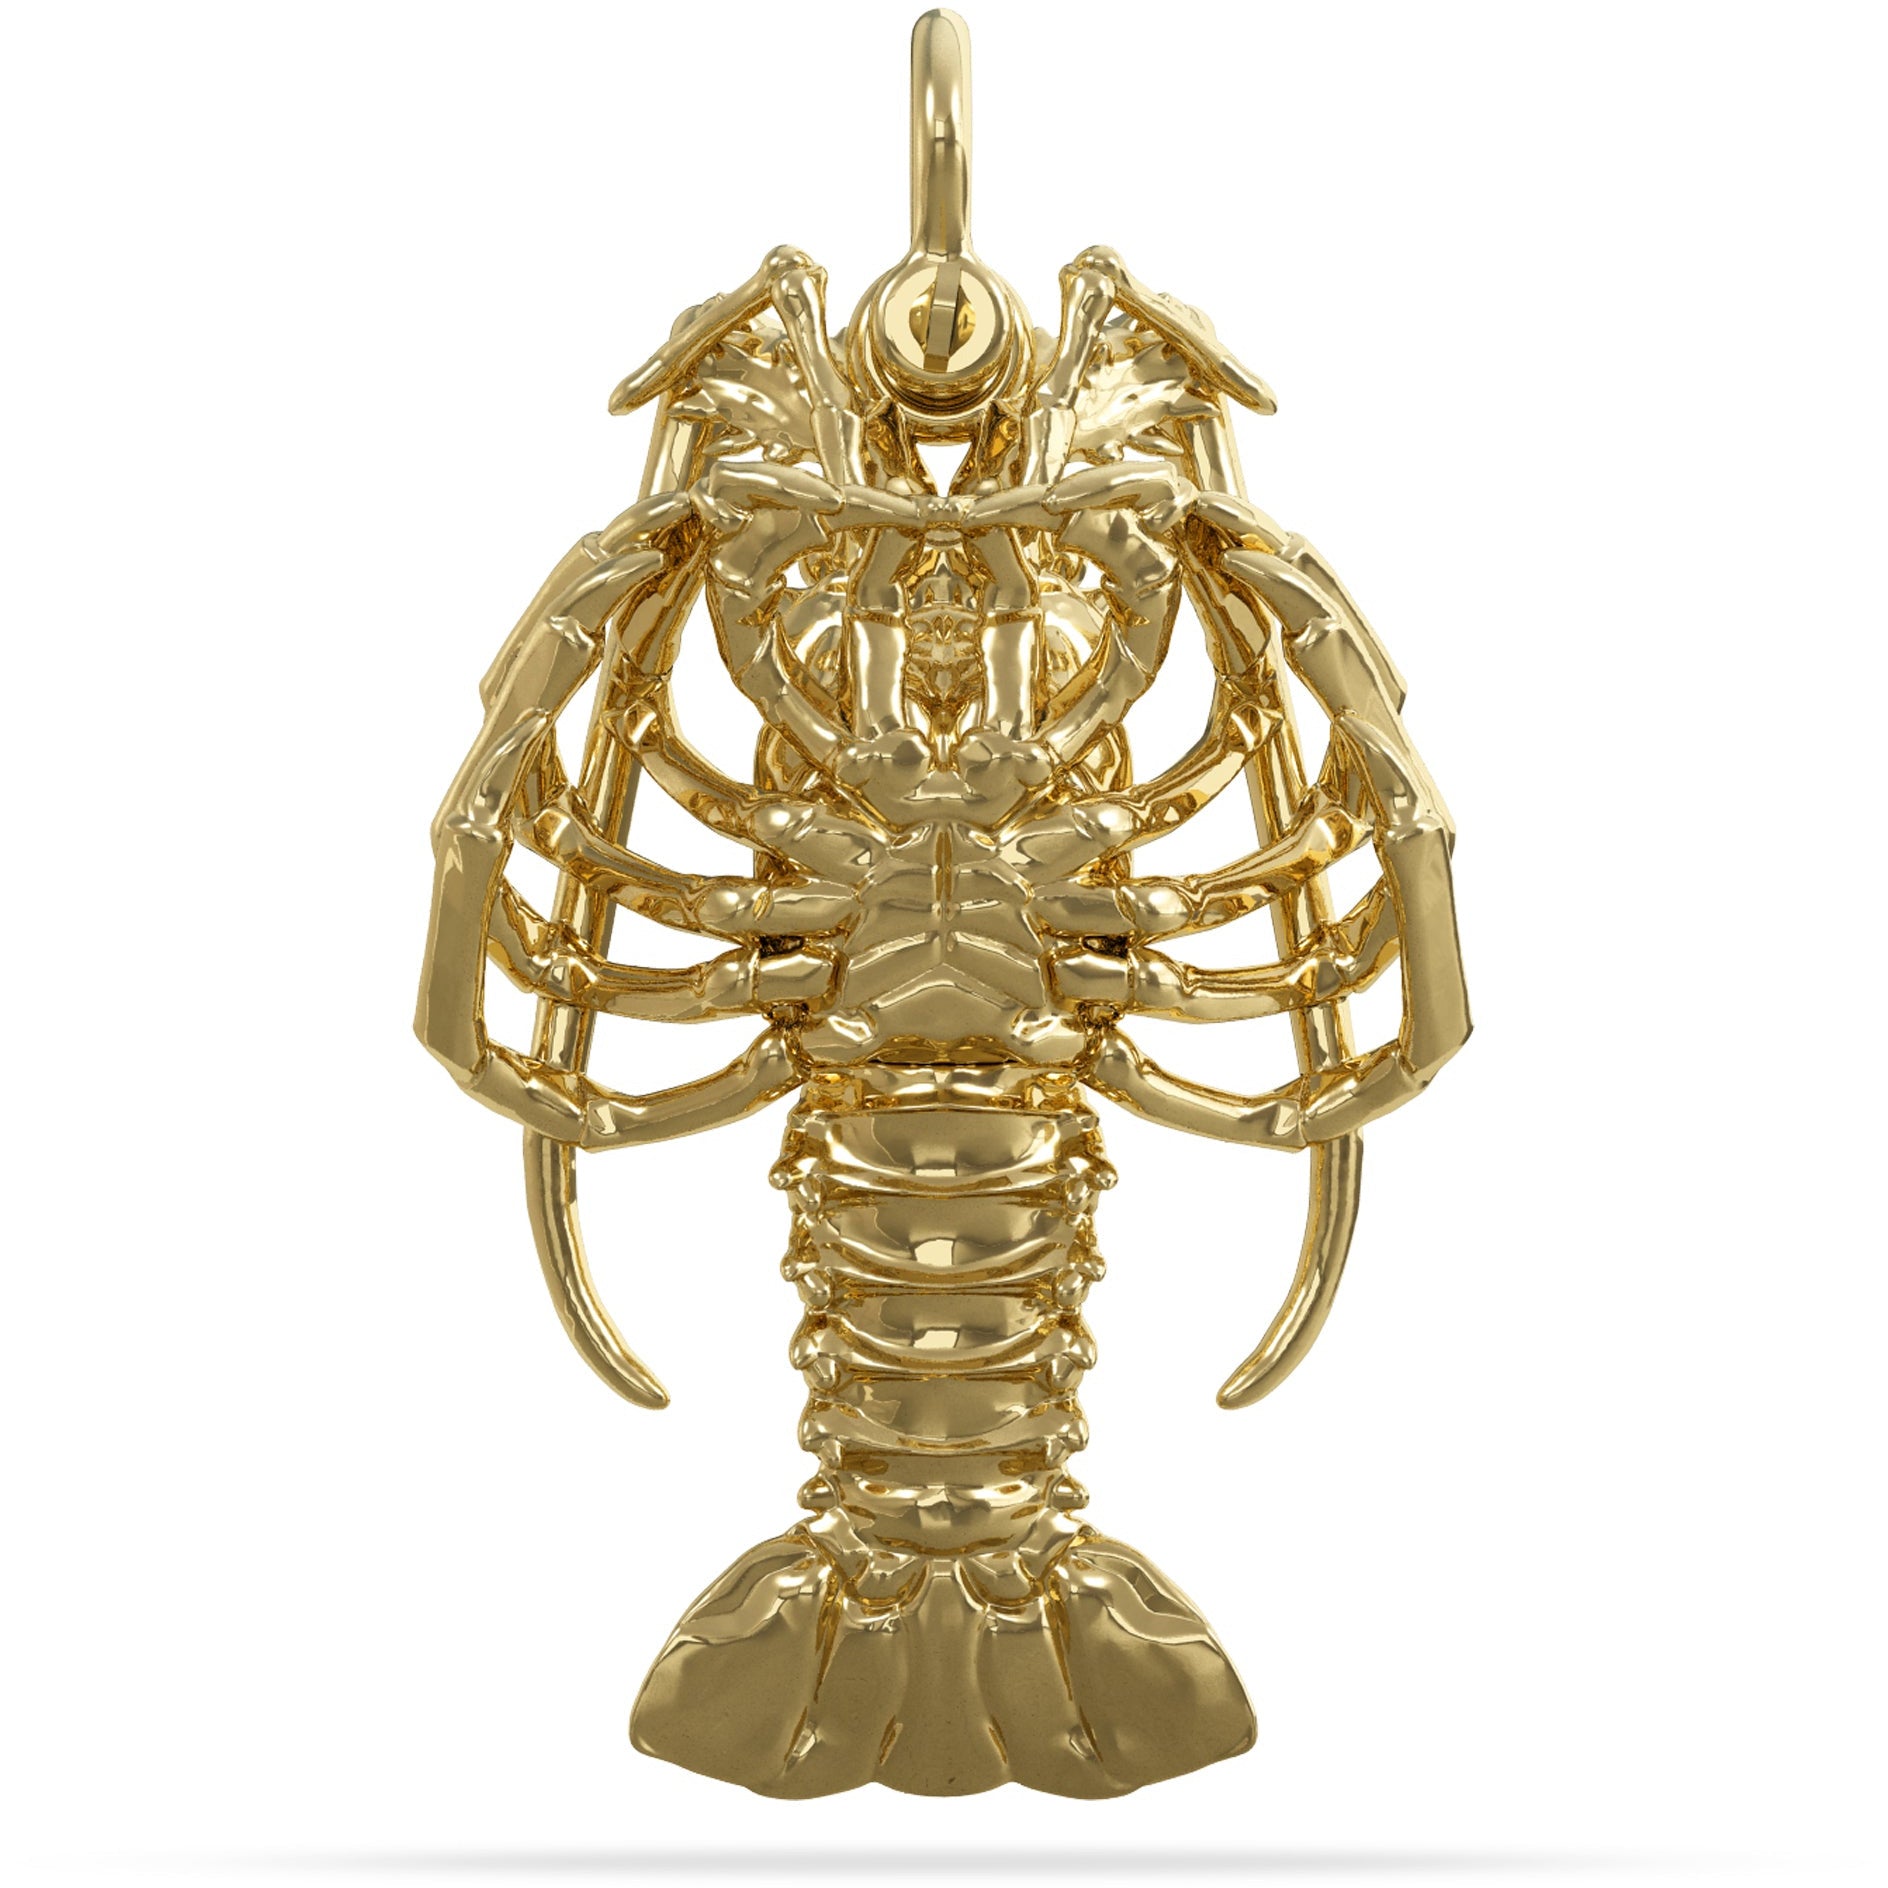 Underside of Solid Gold Spiny Florida Lobster Pendant High Polished Mirror Finish With tail Straight Hung on A Mariner Shackle Bail Custom Designed By Nautical Treasure Jewelry In The Florida Keys Islamorada for 2022 Mini Season